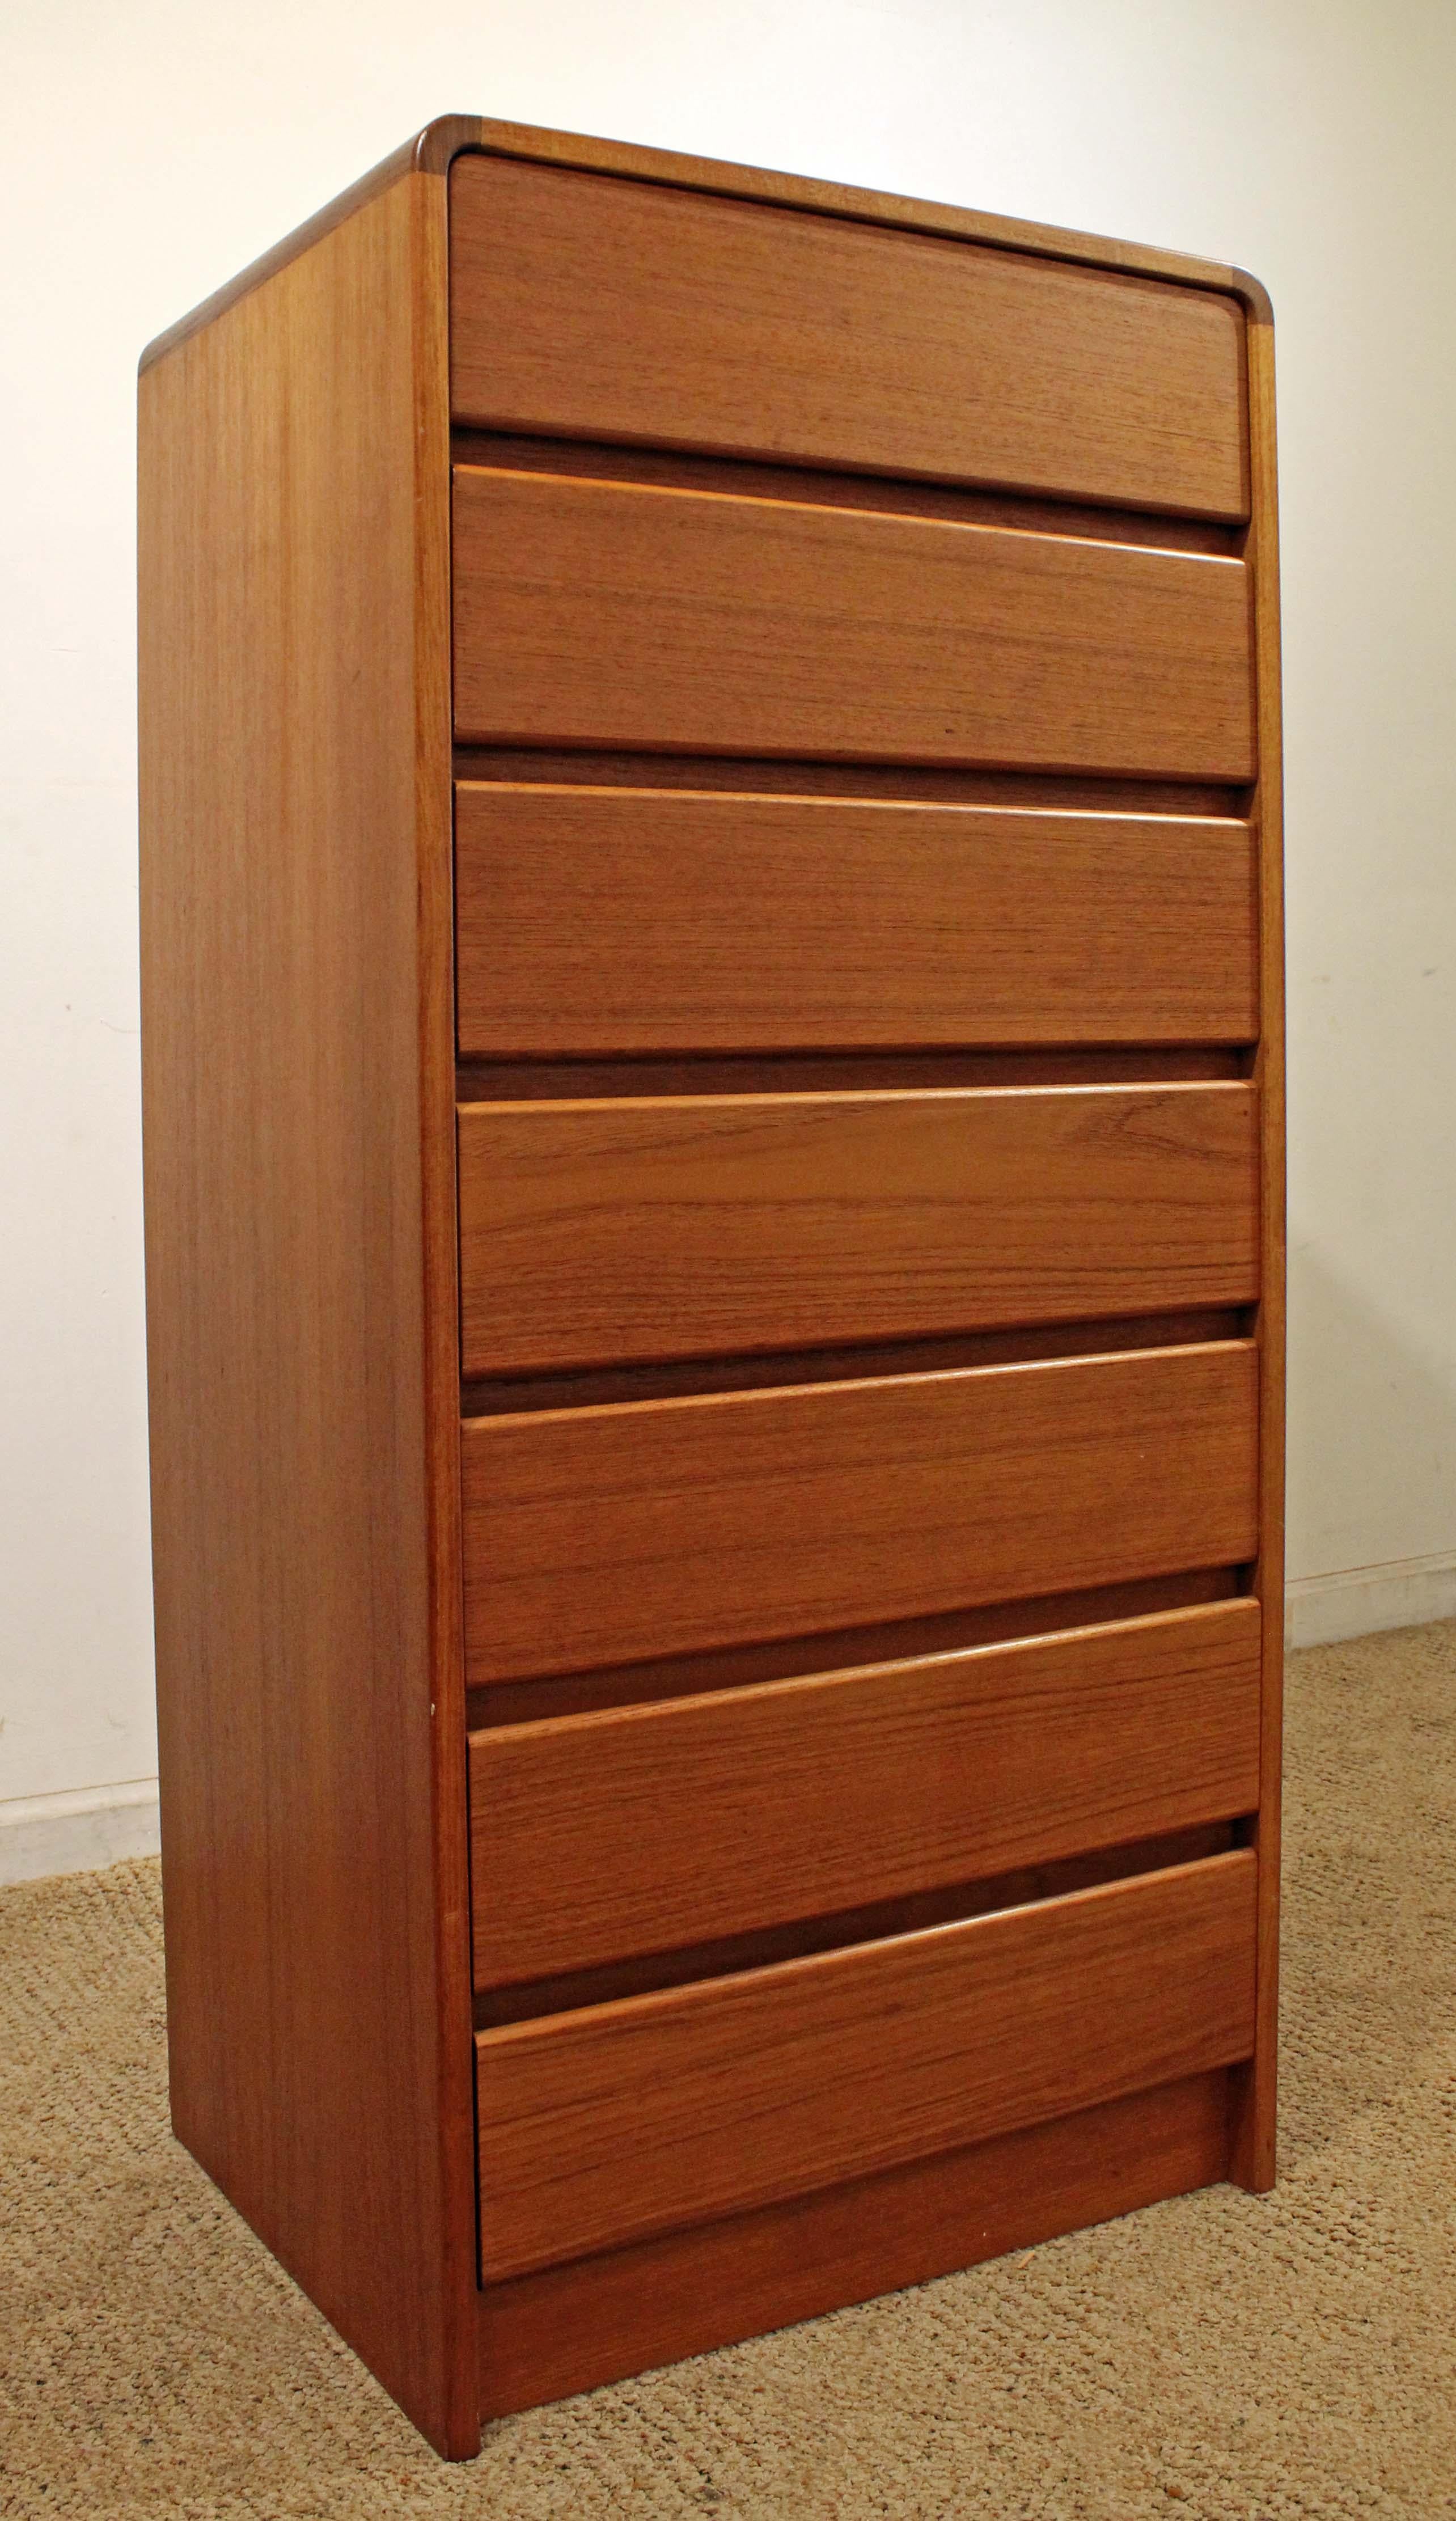 Offered is a Danish modern lingerie chest made by Vinde Mobler. The piece is made of teak and has seven drawers. It is in excellent condition, shows some minor wear. It is signed. Check out our other listings for more Mid-Century Modern